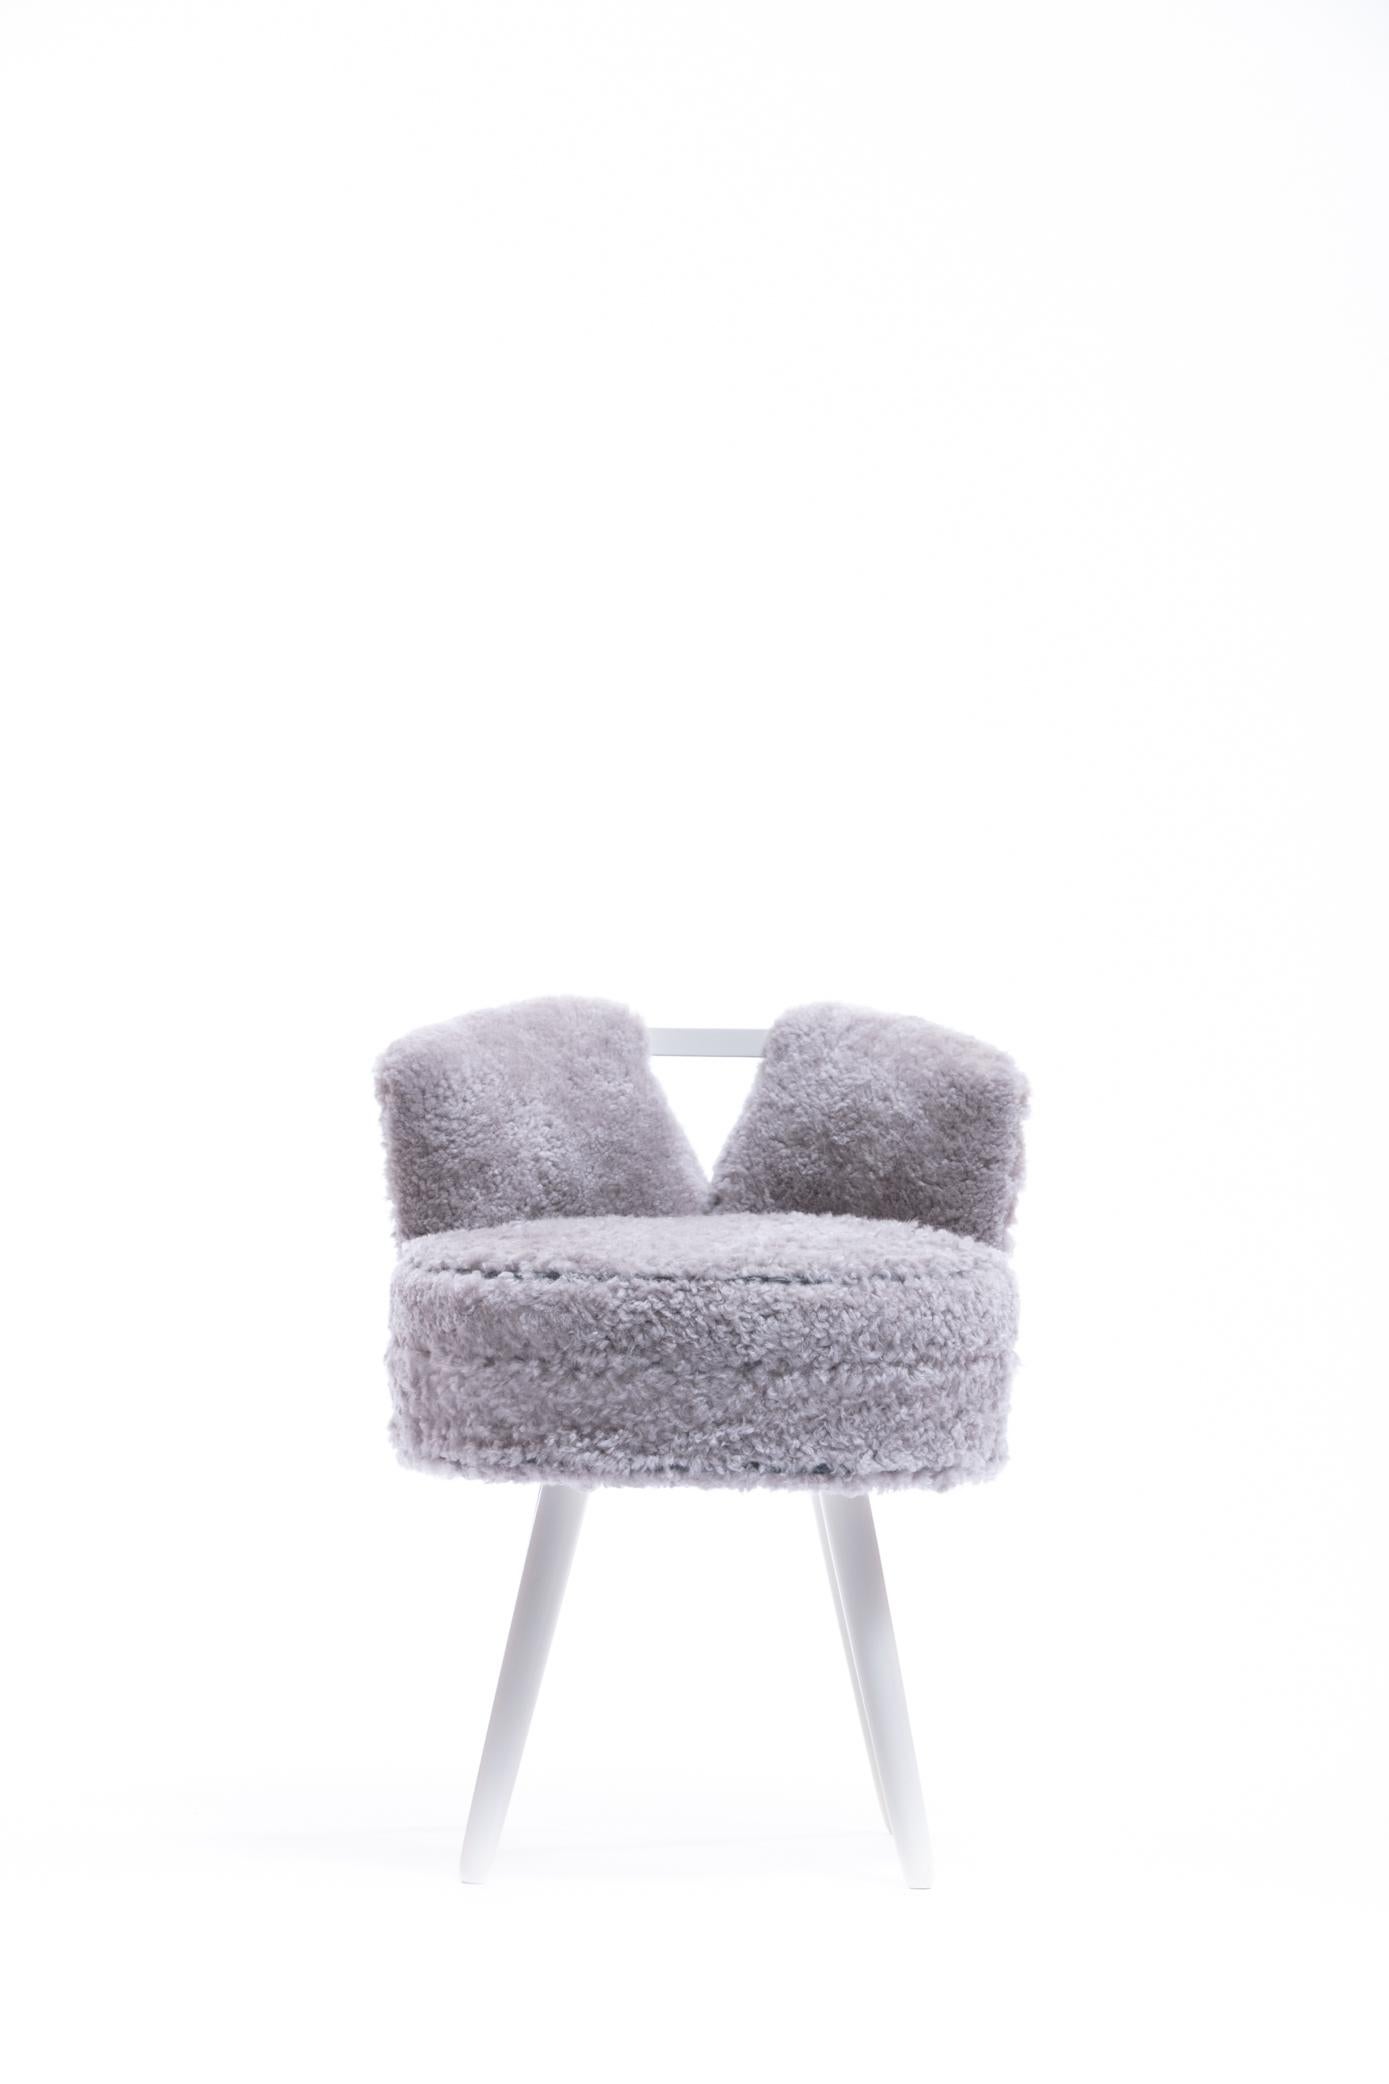 Paul Frankl Style Vanity Stool Upholstered in Shearling For Sale 9